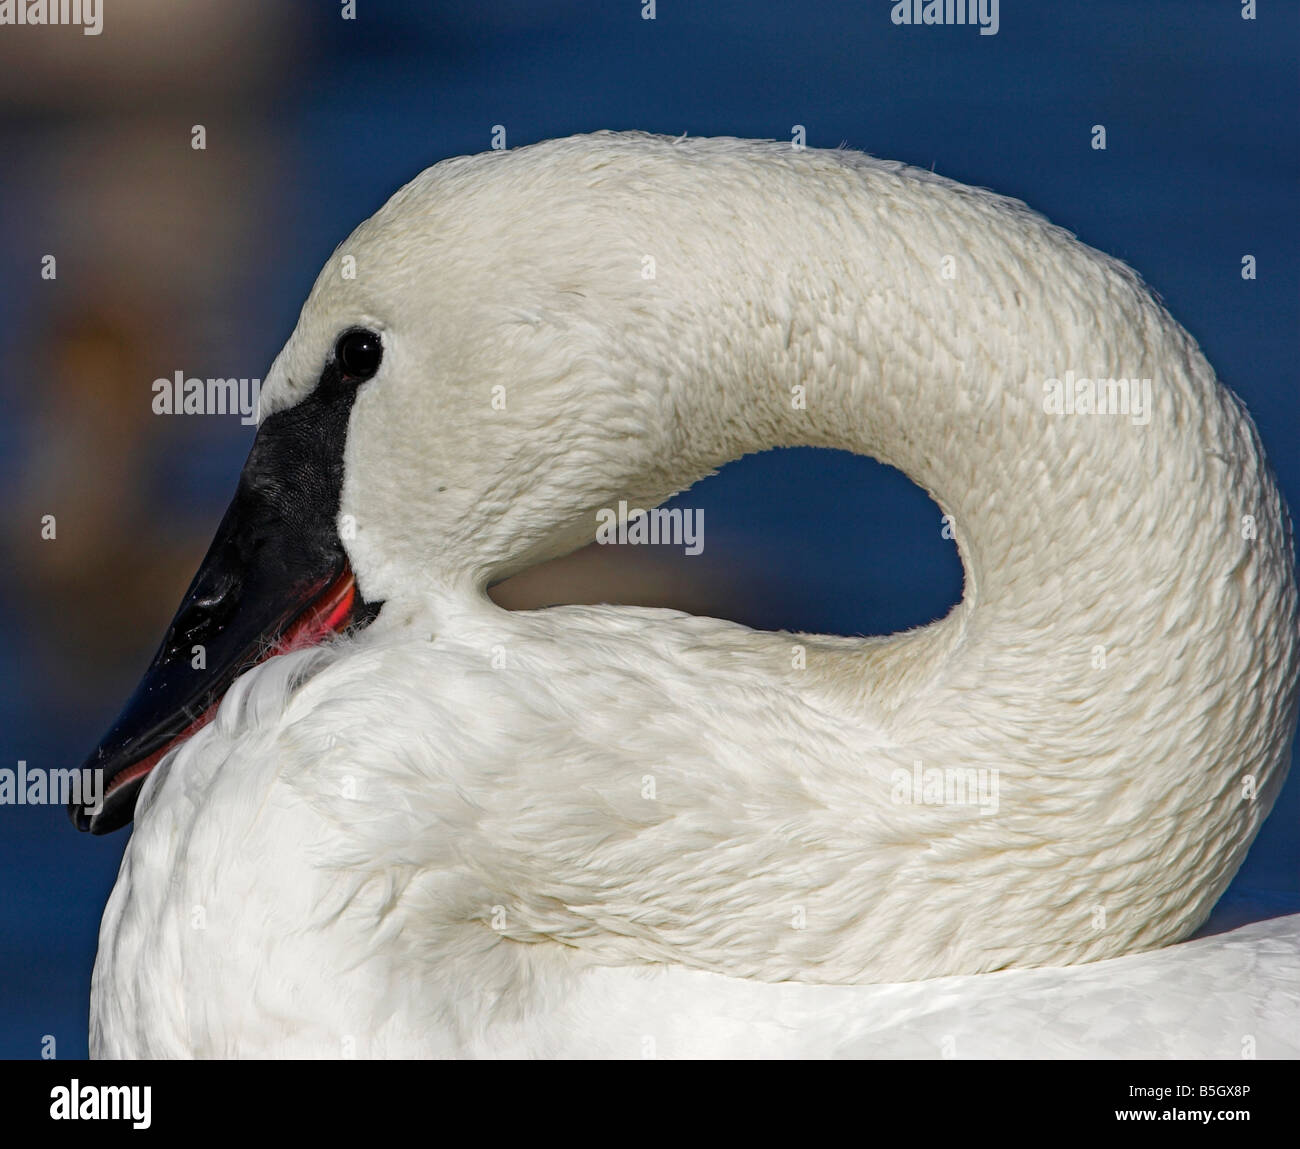 Trumpeter Swan Cygnus buccinator close up of head & curved neck at Esquimalt Lagoon Victoria Vancouver Island BC in February Stock Photo